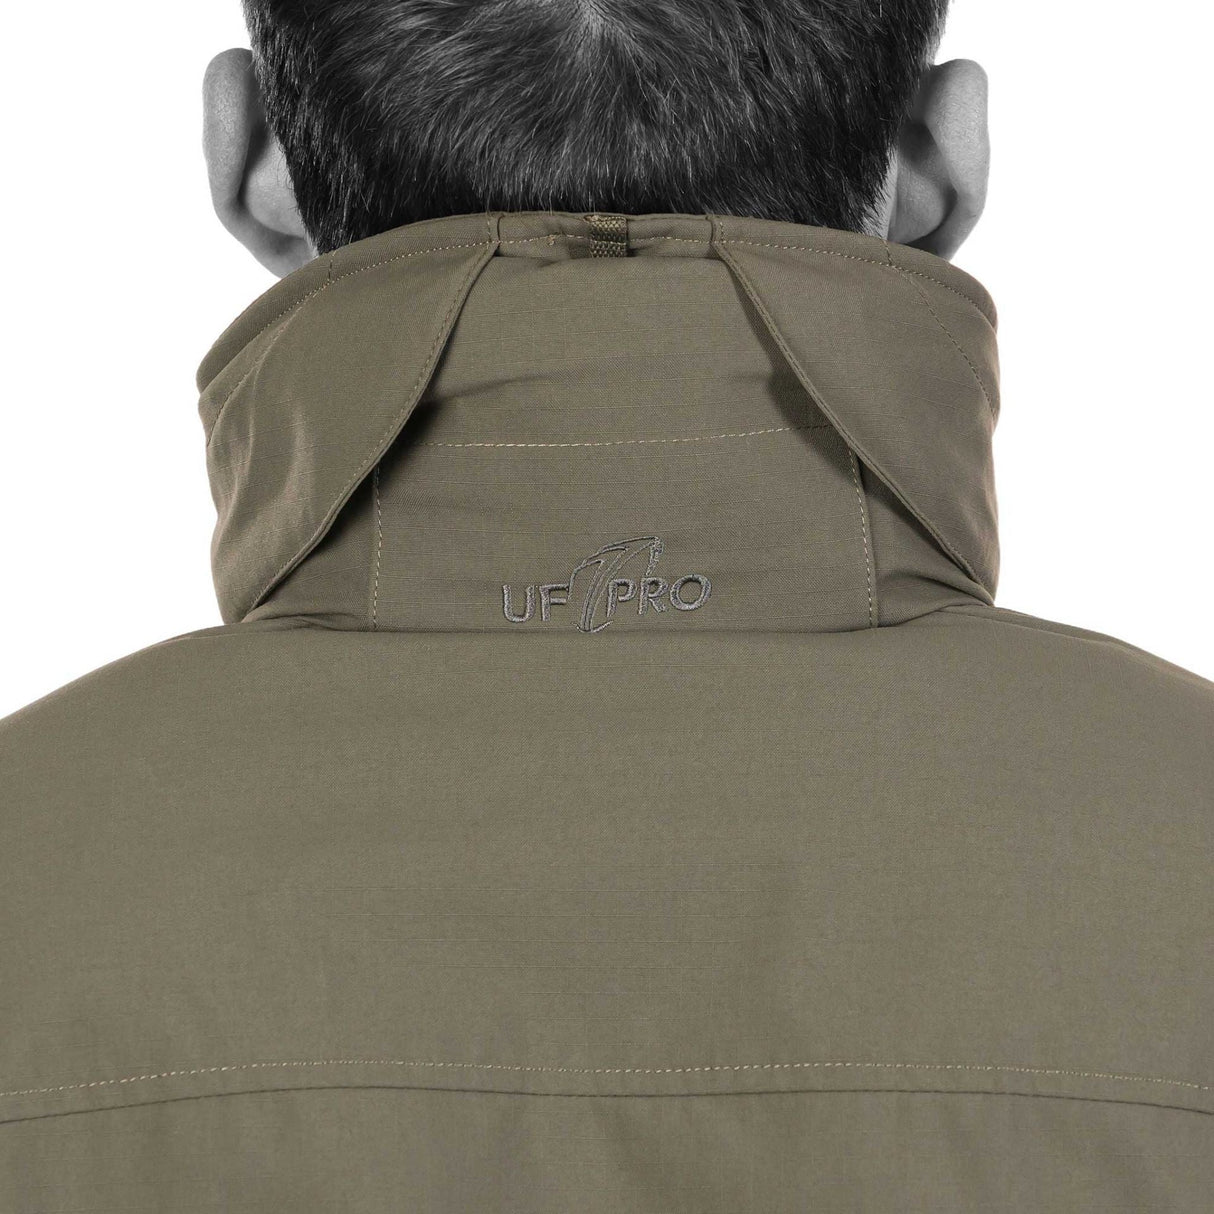 UF PRO Delta Eagle Gen.3 Tactical Softshell Jacket: Multiple storage pockets for convenient carrying of essentials.